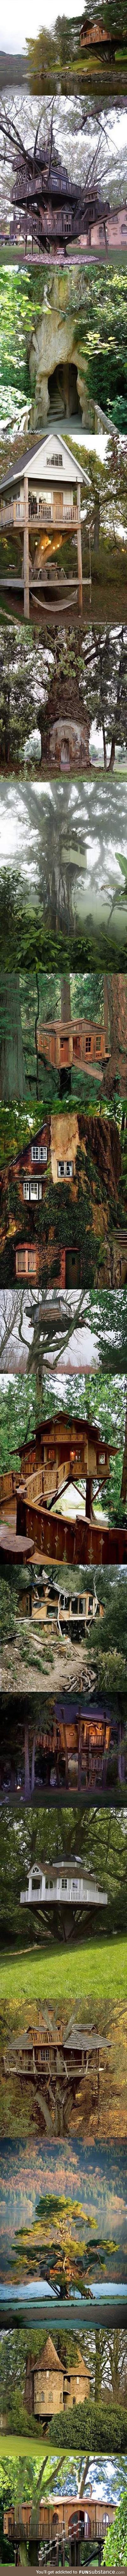 I need a grownup tree house in my life